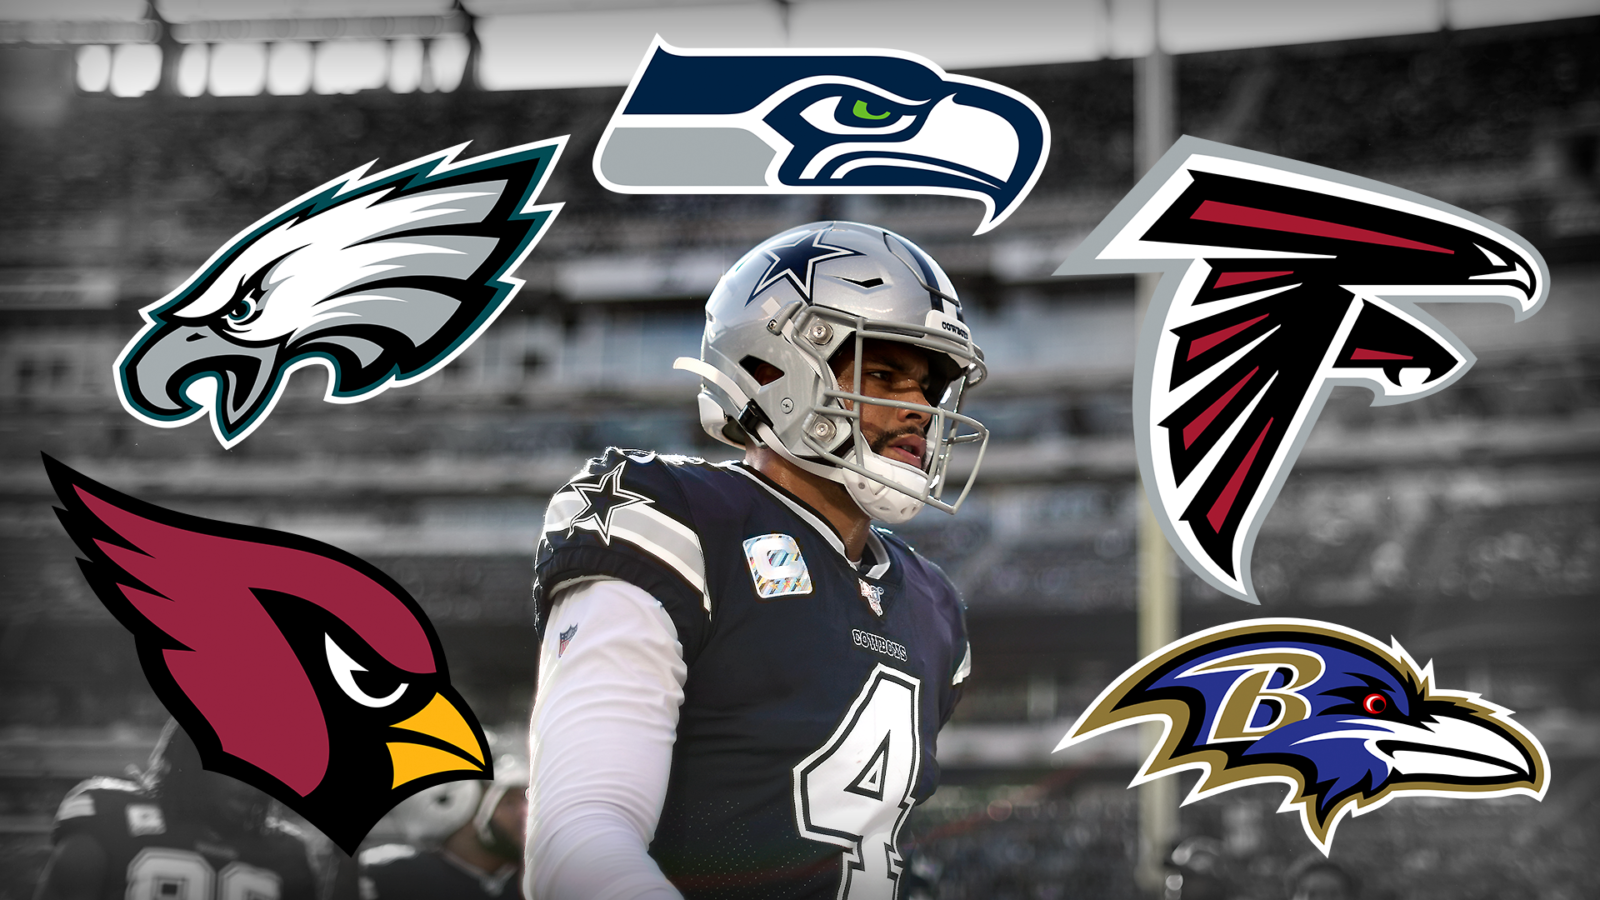 NFL schedule allows three teams the rare chance to the Bird